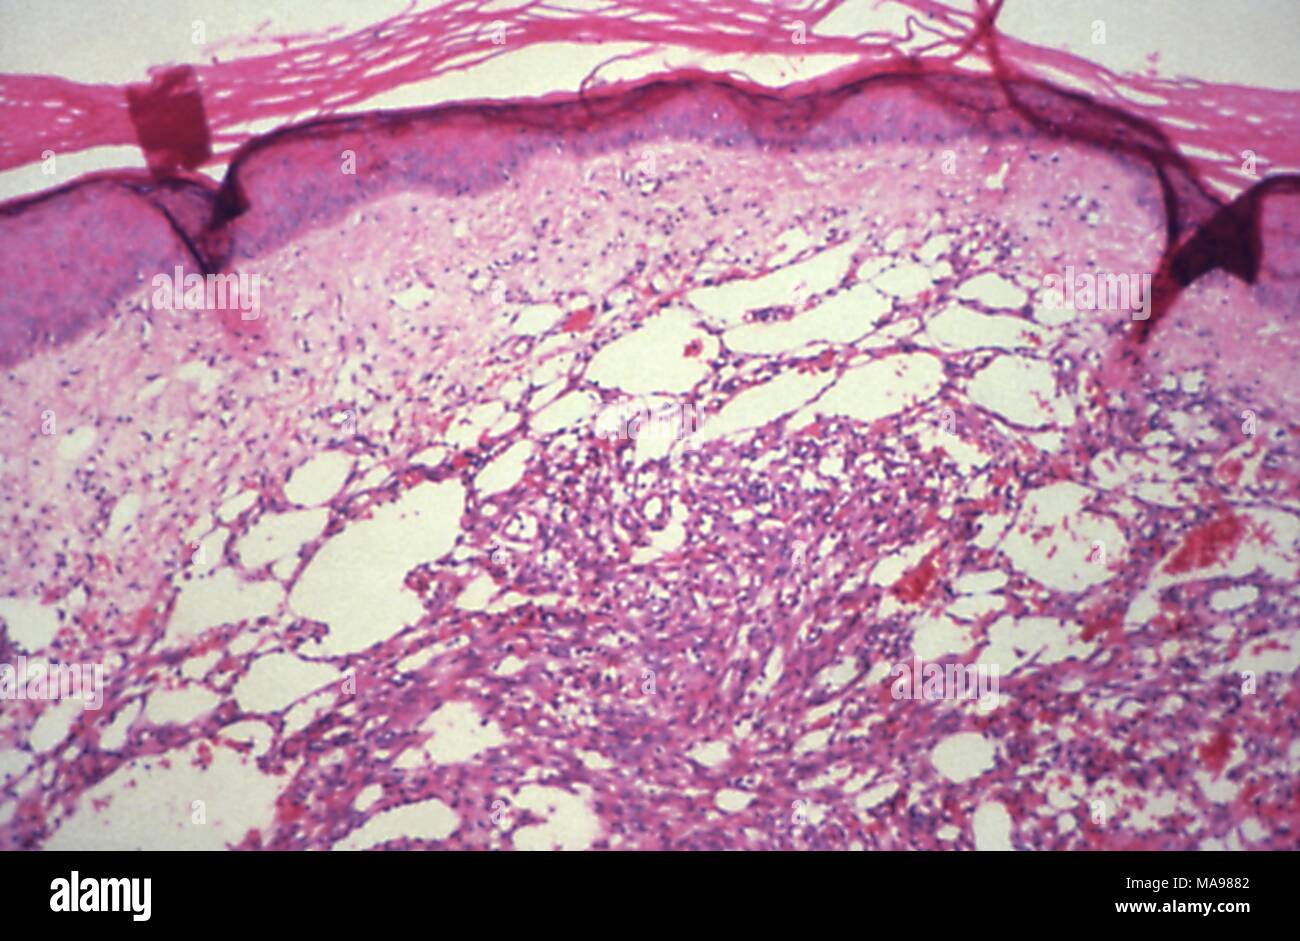 Kaposi's sarcoma revealed in the medium magnification photomicrograph of a cutaneous biopsy, 1981. Image courtesy Centers for Disease Control (CDC) / Dr Steve Kraus. () Stock Photo